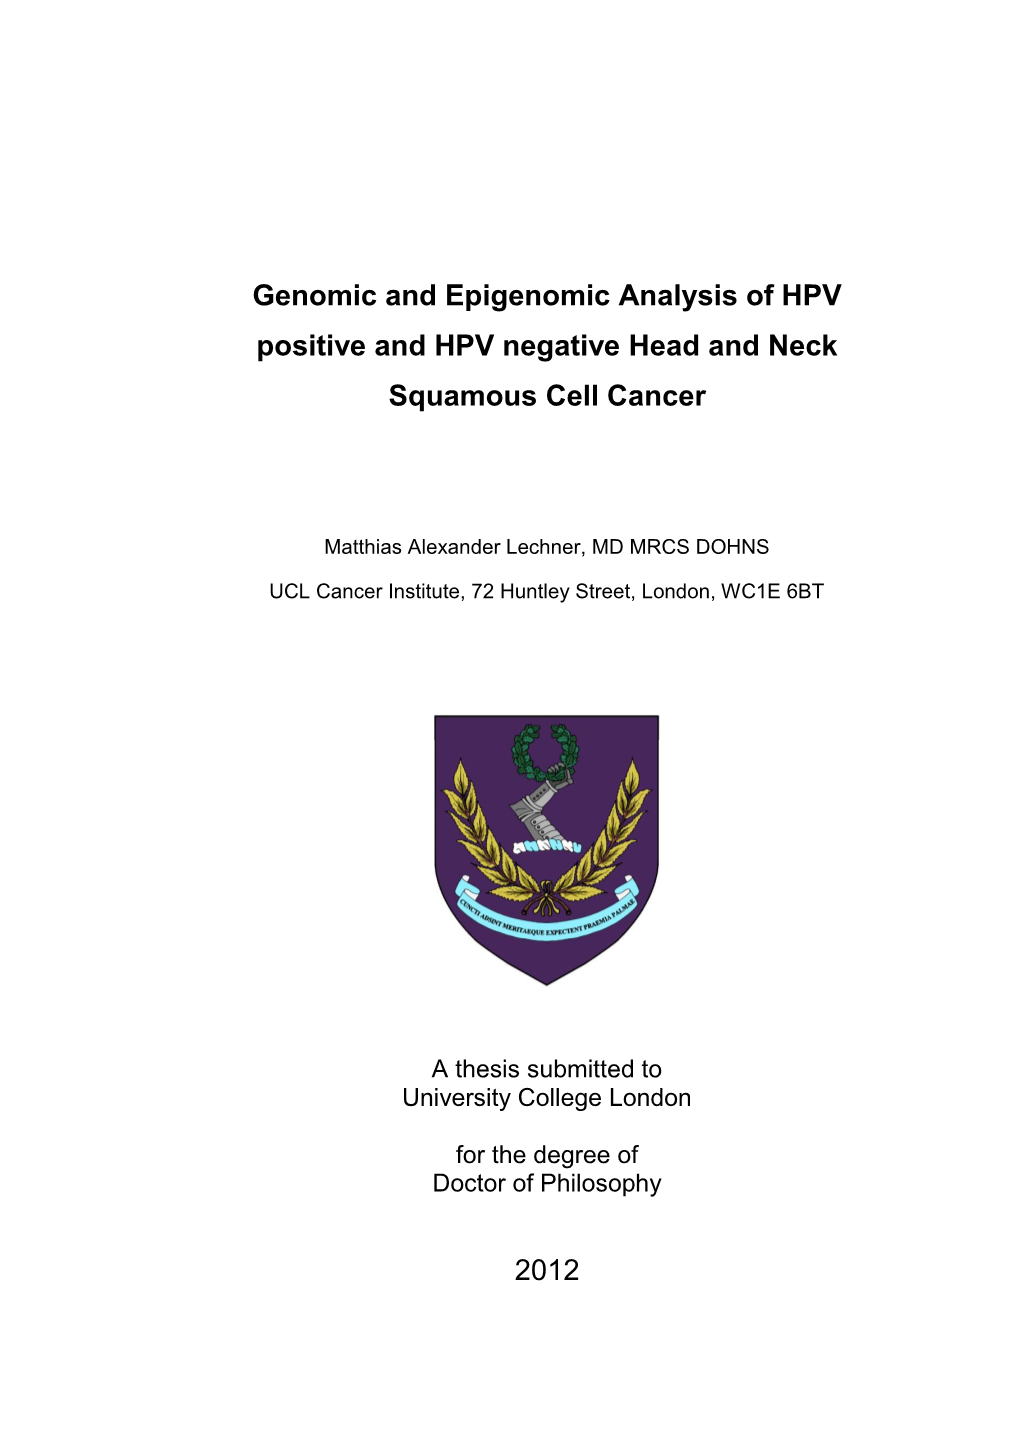 Genomic and Epigenomic Analysis of HPV Positive and HPV Negative Head and Neck Squamous Cell Cancer